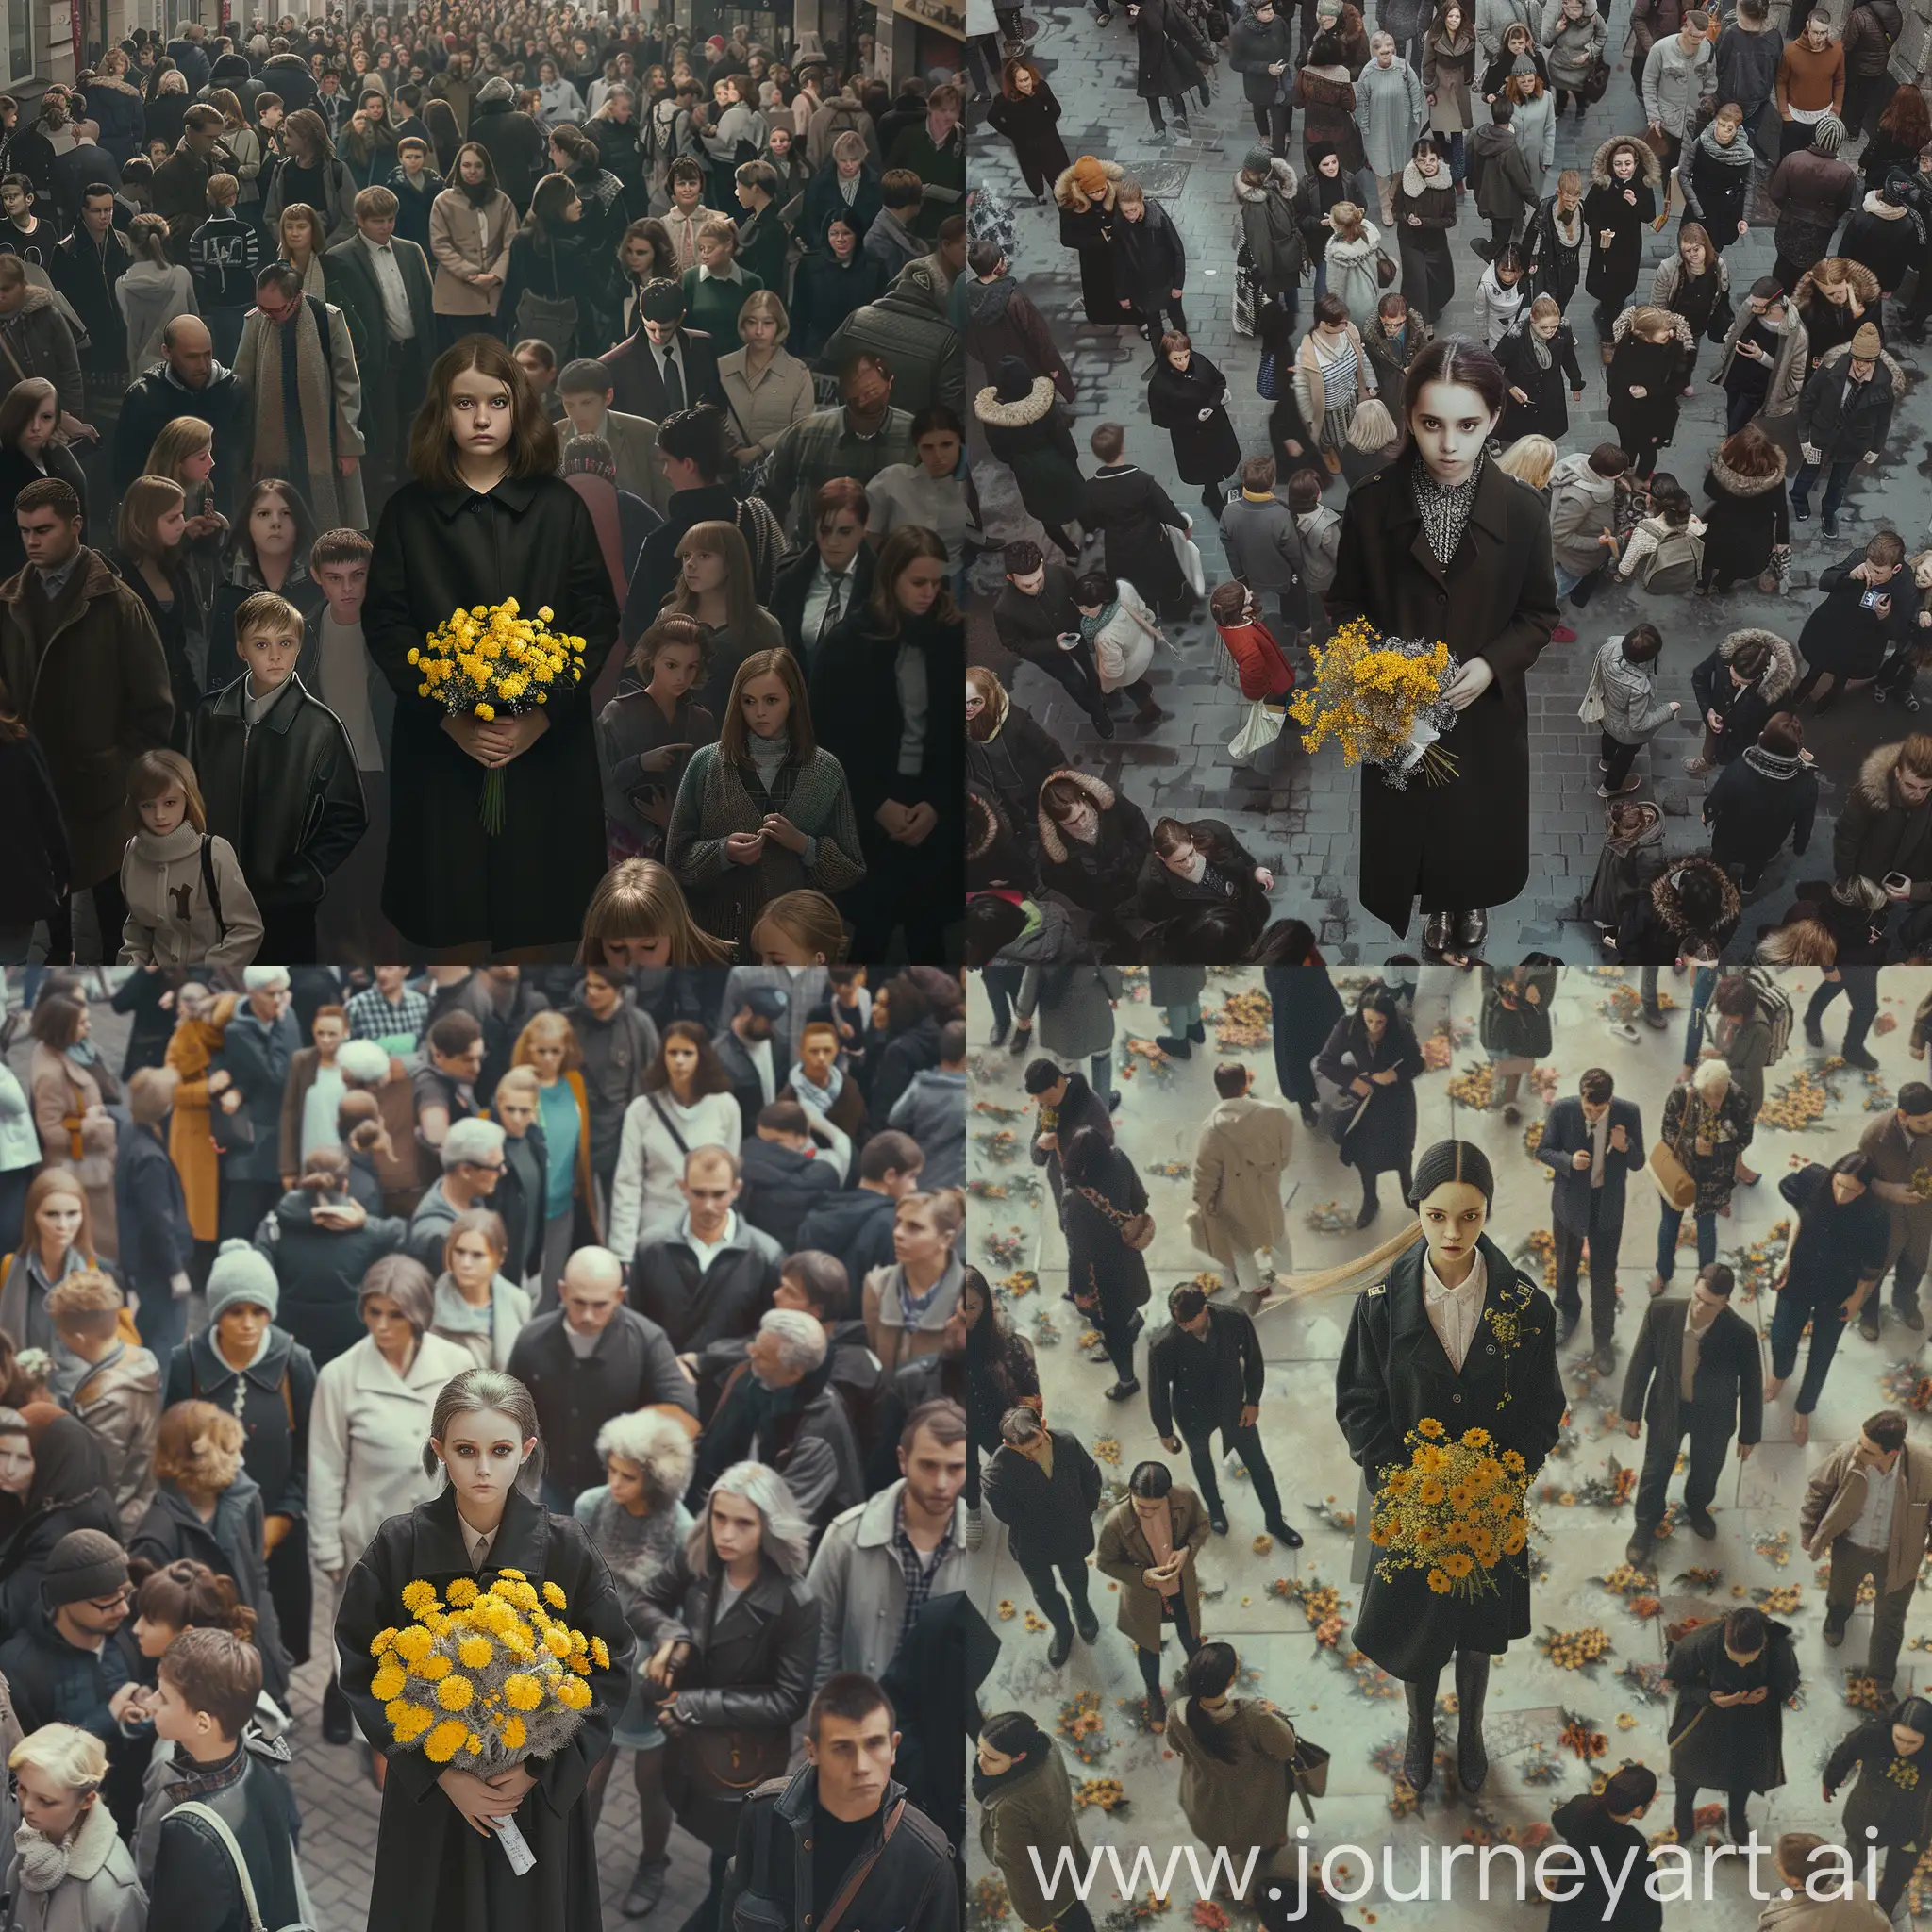 a realistic photo of a girl in the image of Margarita from Bulgakov's novel "The Master and Margarita". The girl is wearing a black coat, her hair is tied back and she is holding a bouquet of yellow flowers. The setting around it is a modern city. She stands among a large number of people going about their business and not noticing her. 3*4 photo format, 35mm lens.